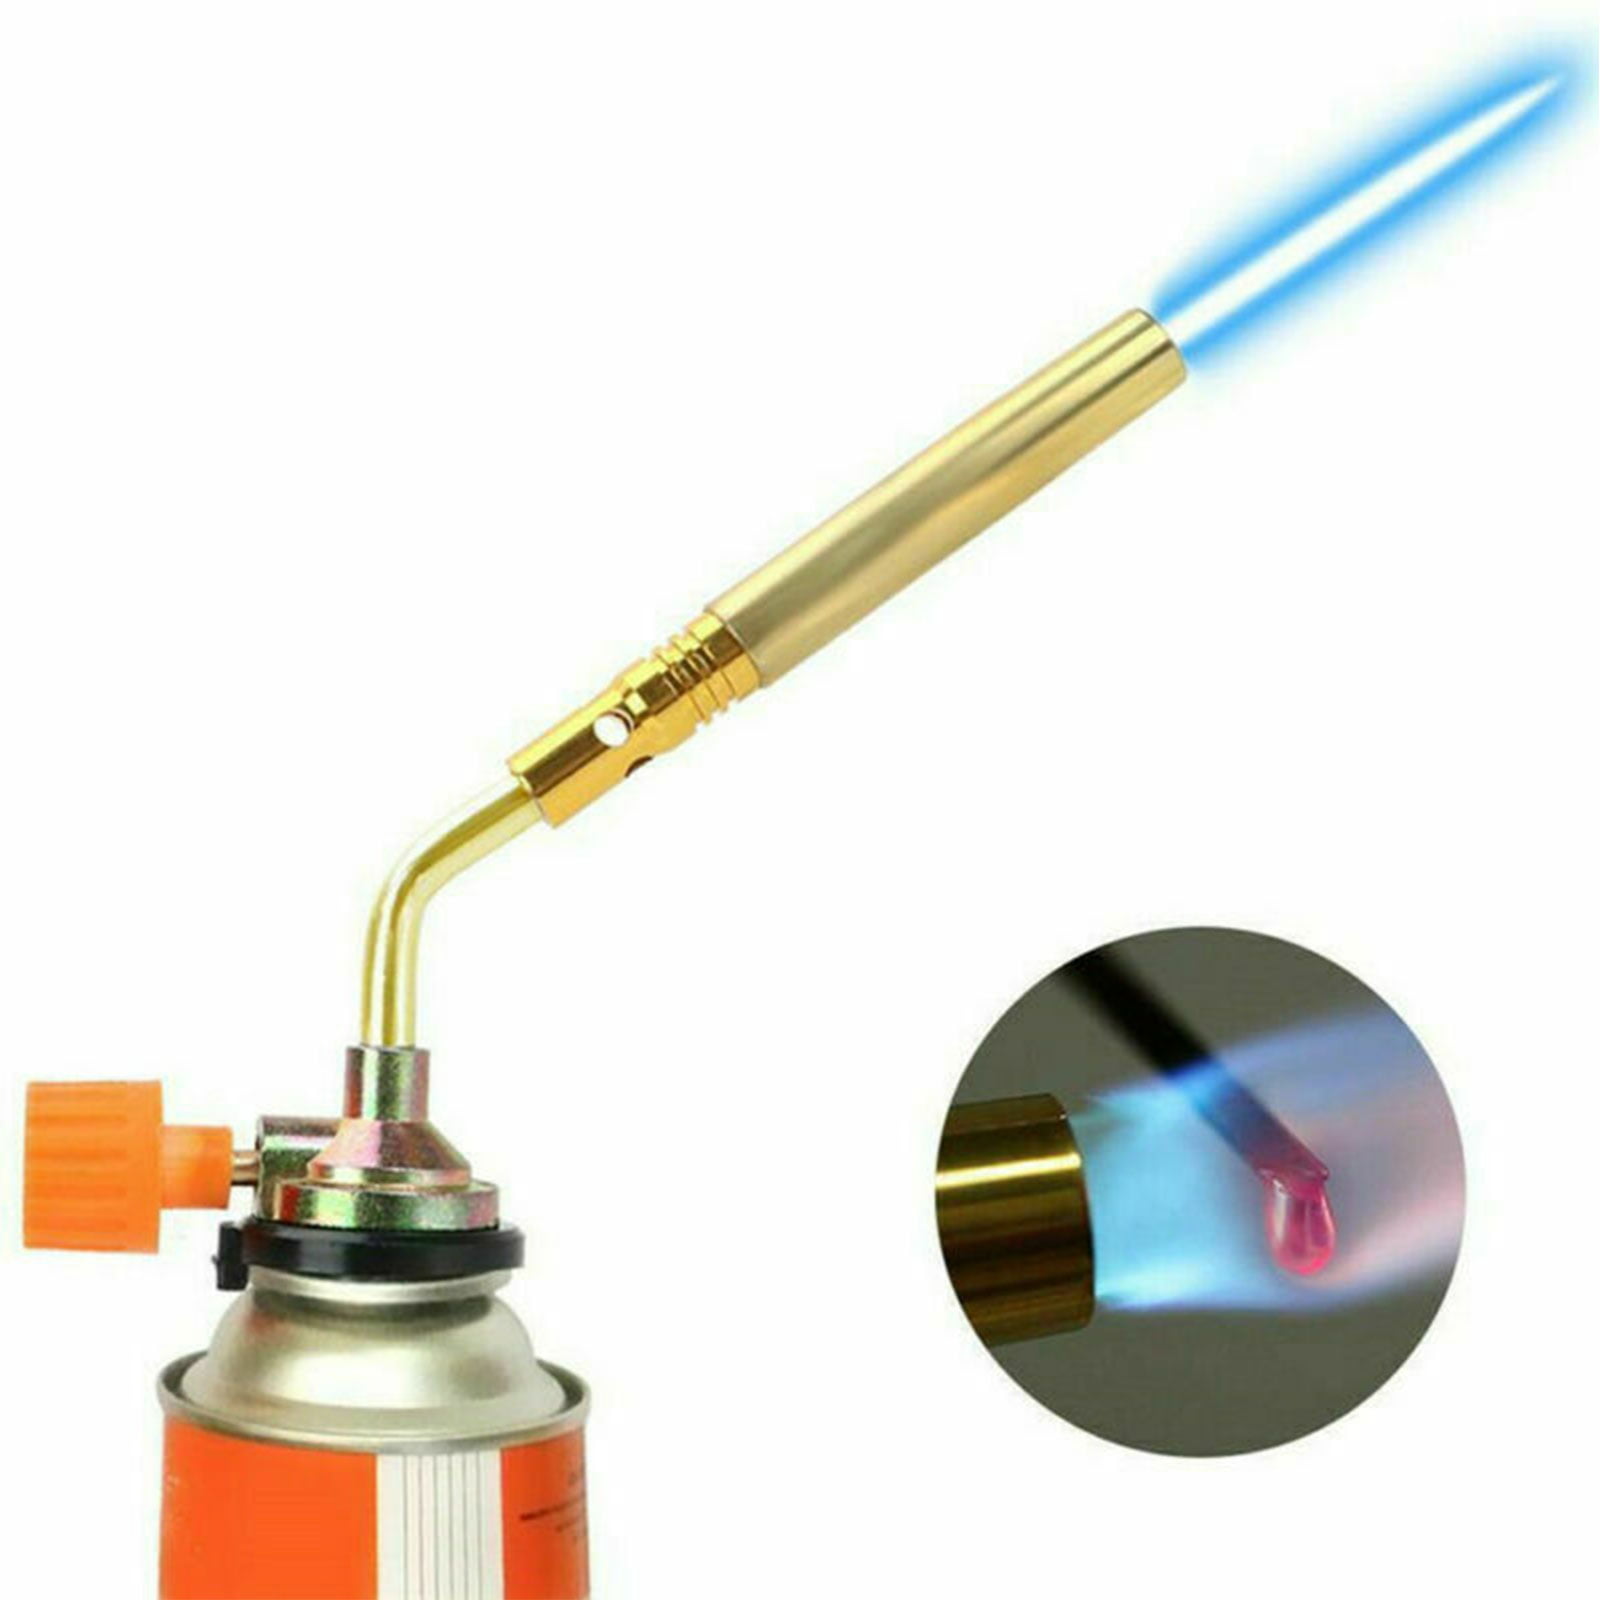 Refillable Blow Torch Flamethrower Lighter Blowlamp Kitchen Silver 2 Cans 